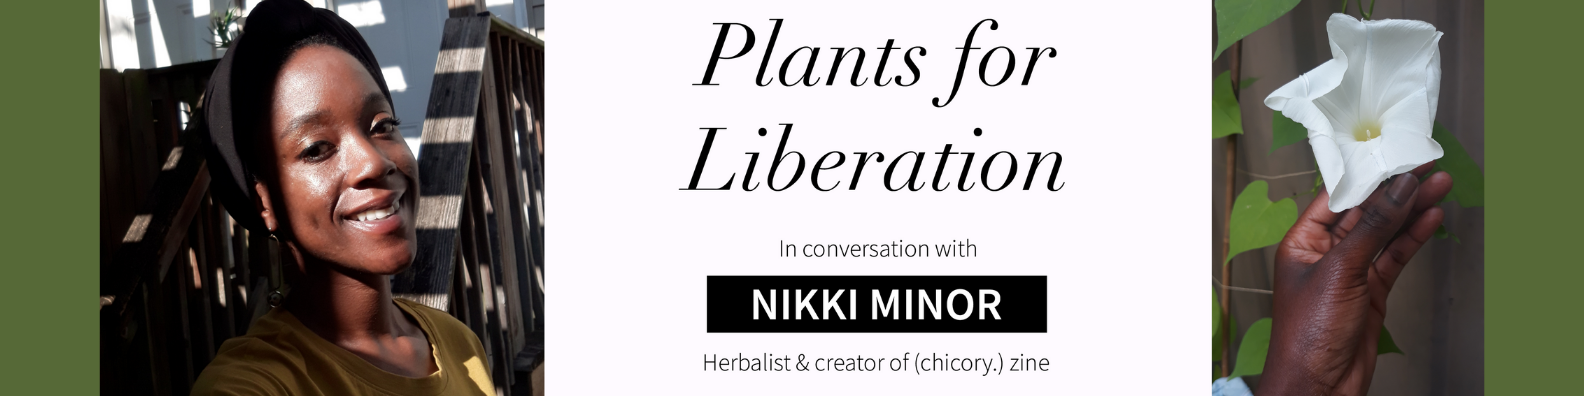 Plants for Liberation: in conversation with herbalist Nikki Minor